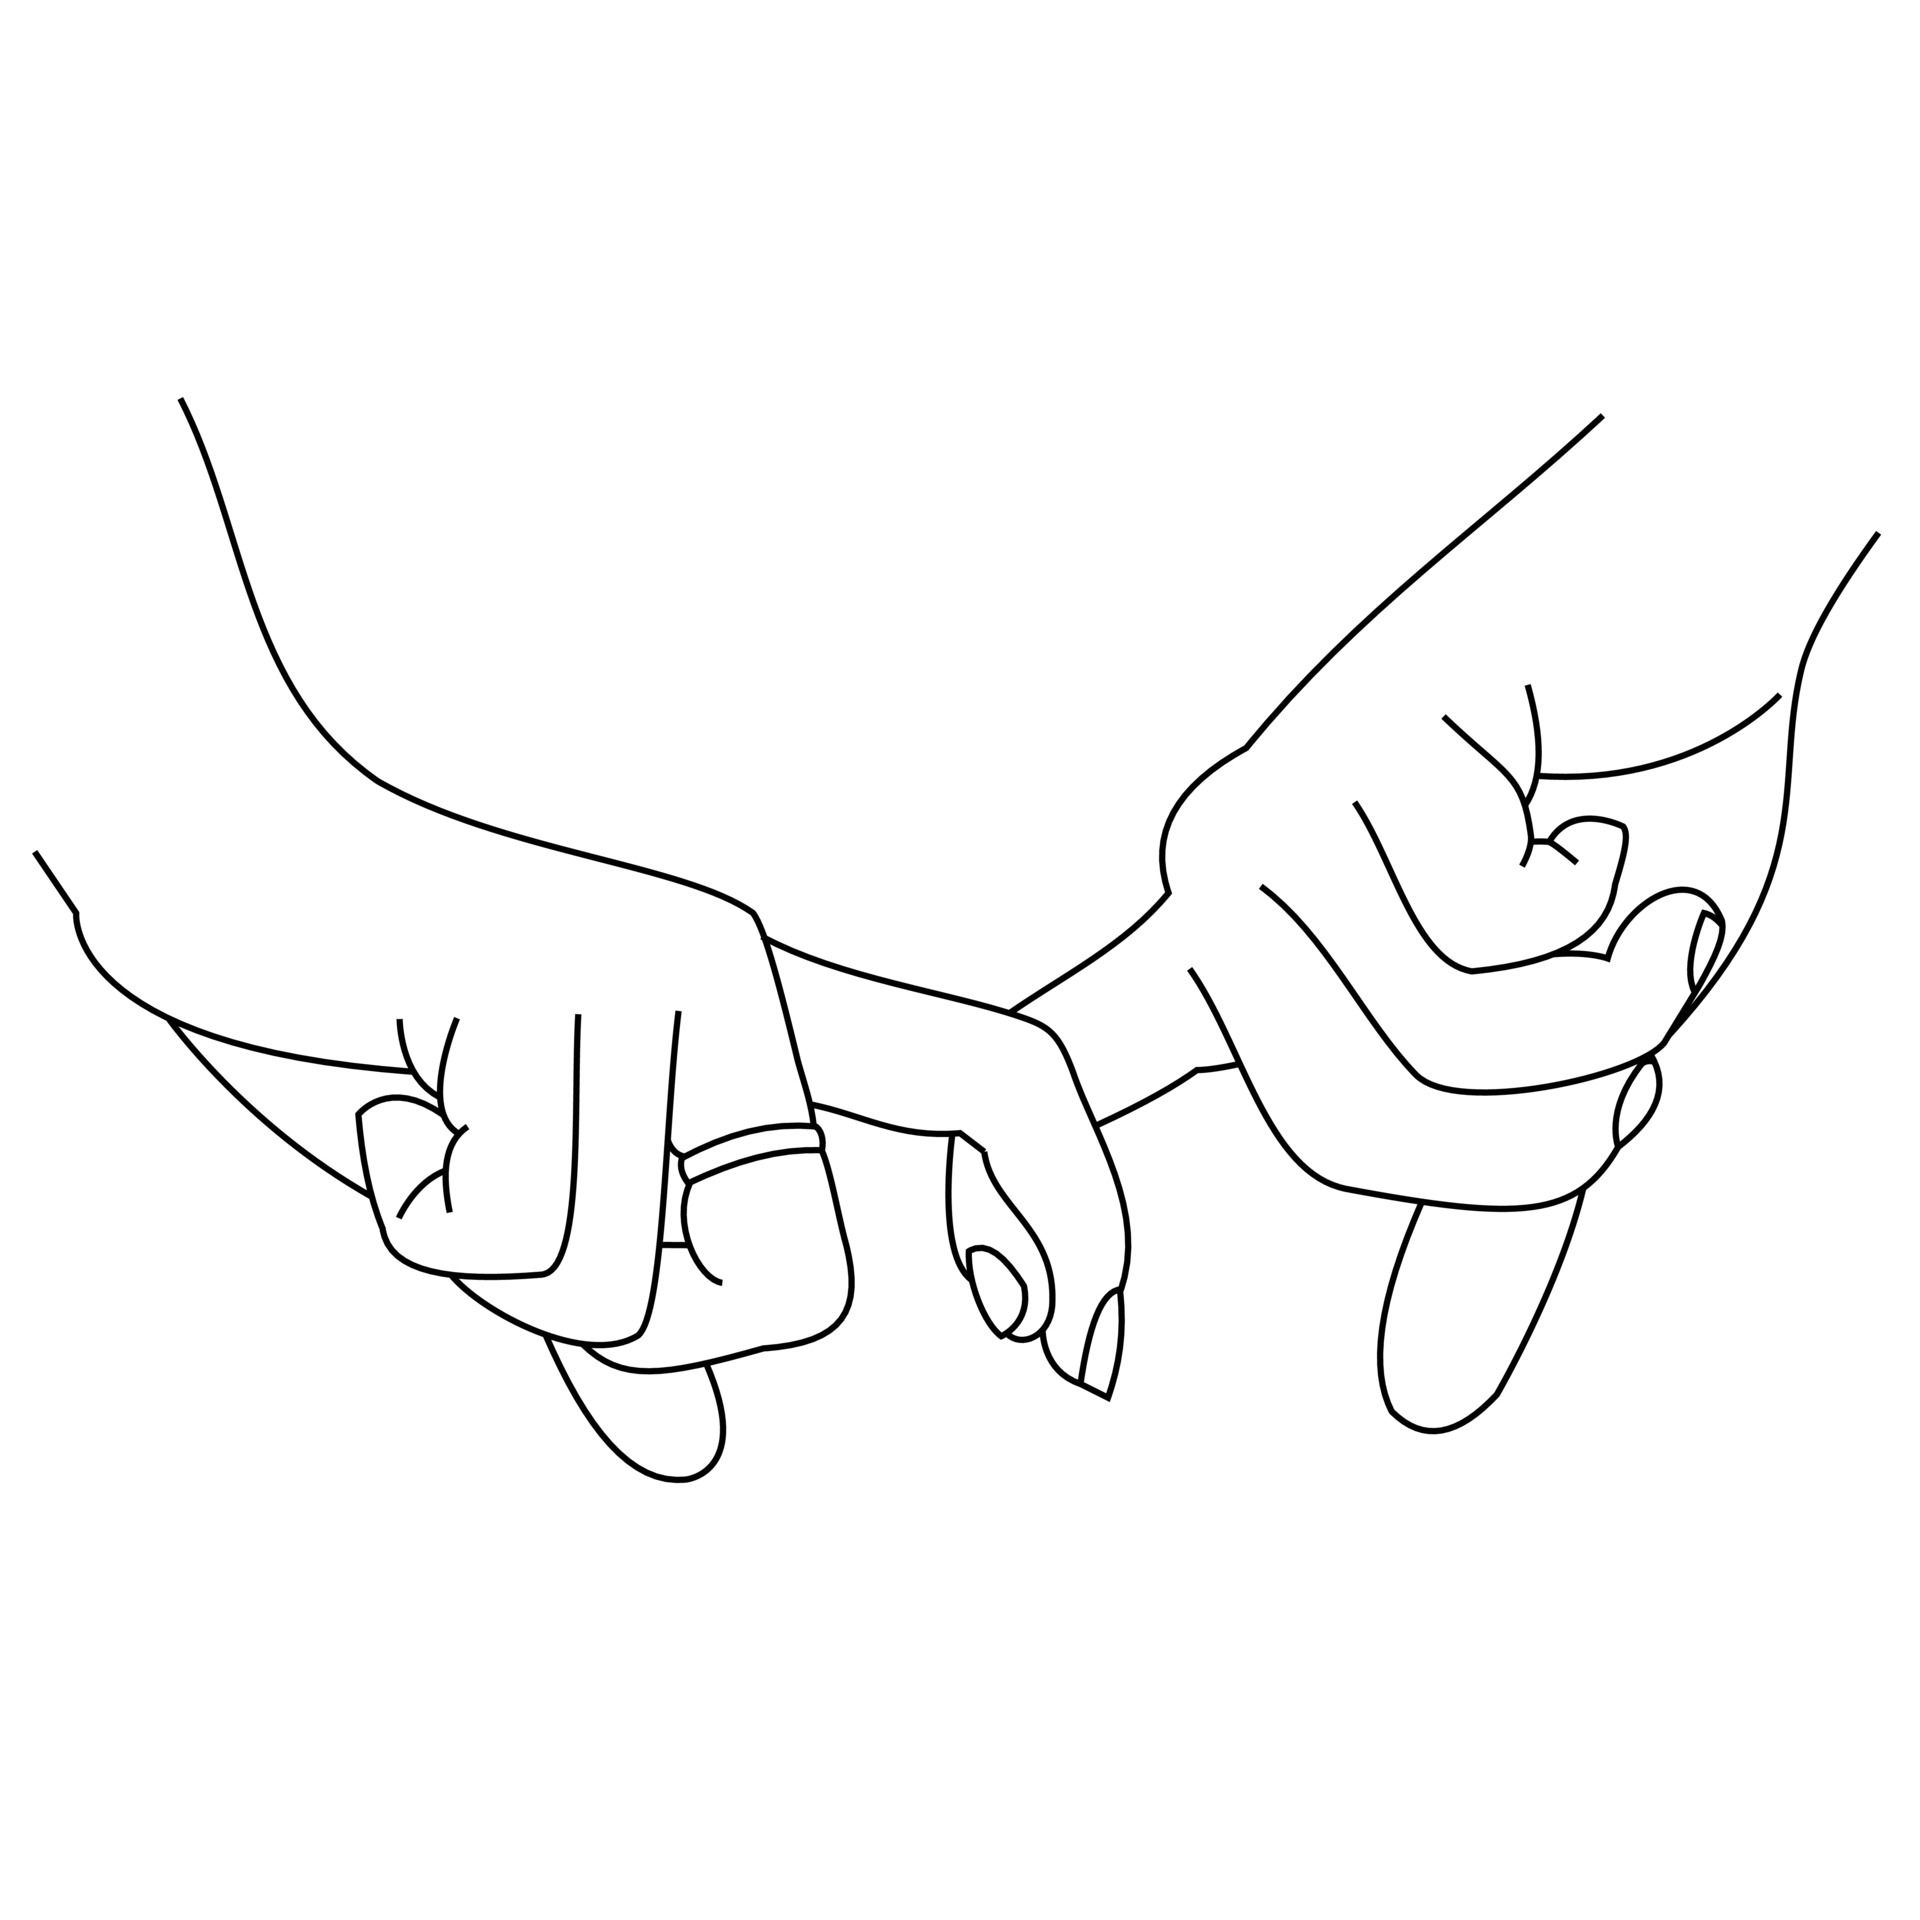 Illustration line drawing a hands making promise as a friendship ...